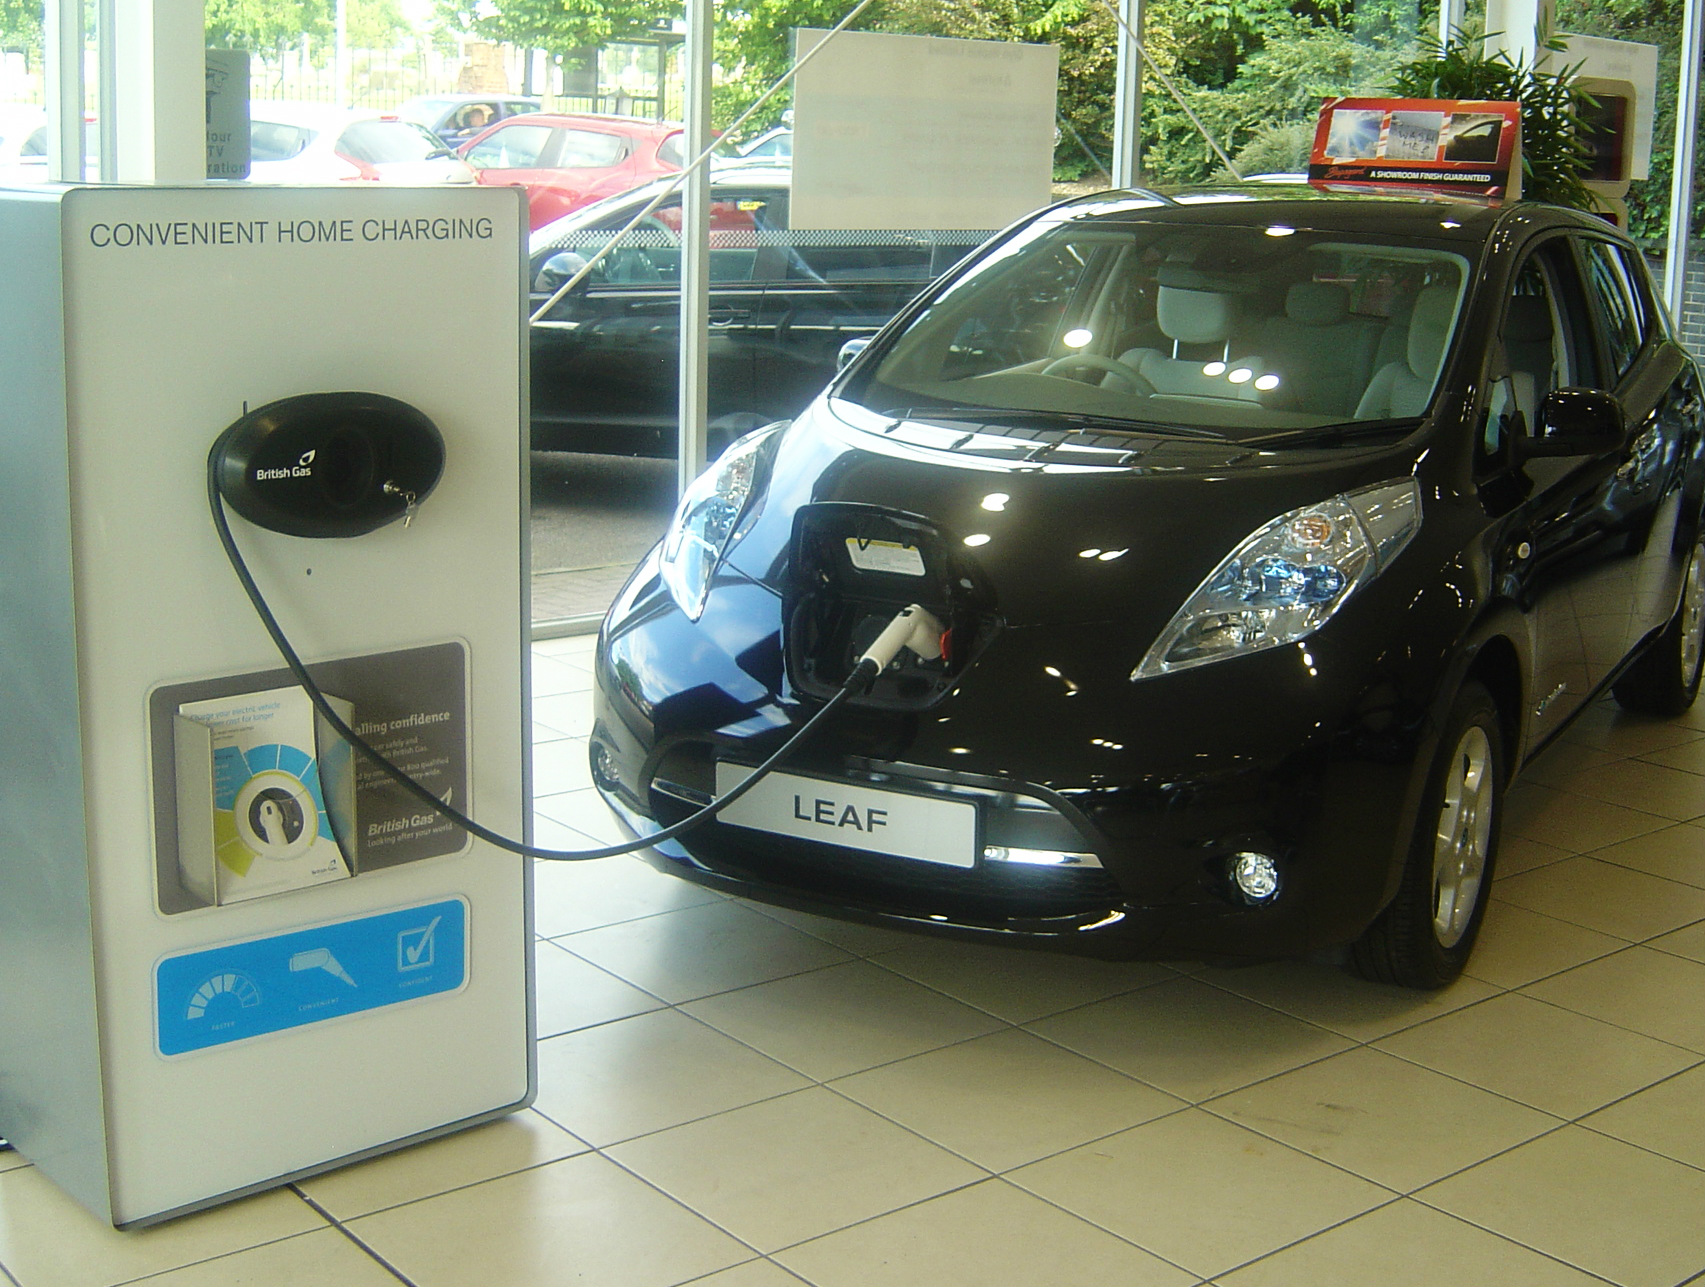 Used car buying guide: super-saver plug-in electric cars, including the Renault Zoe, Nissan Leaf and Vauxhall Ampera